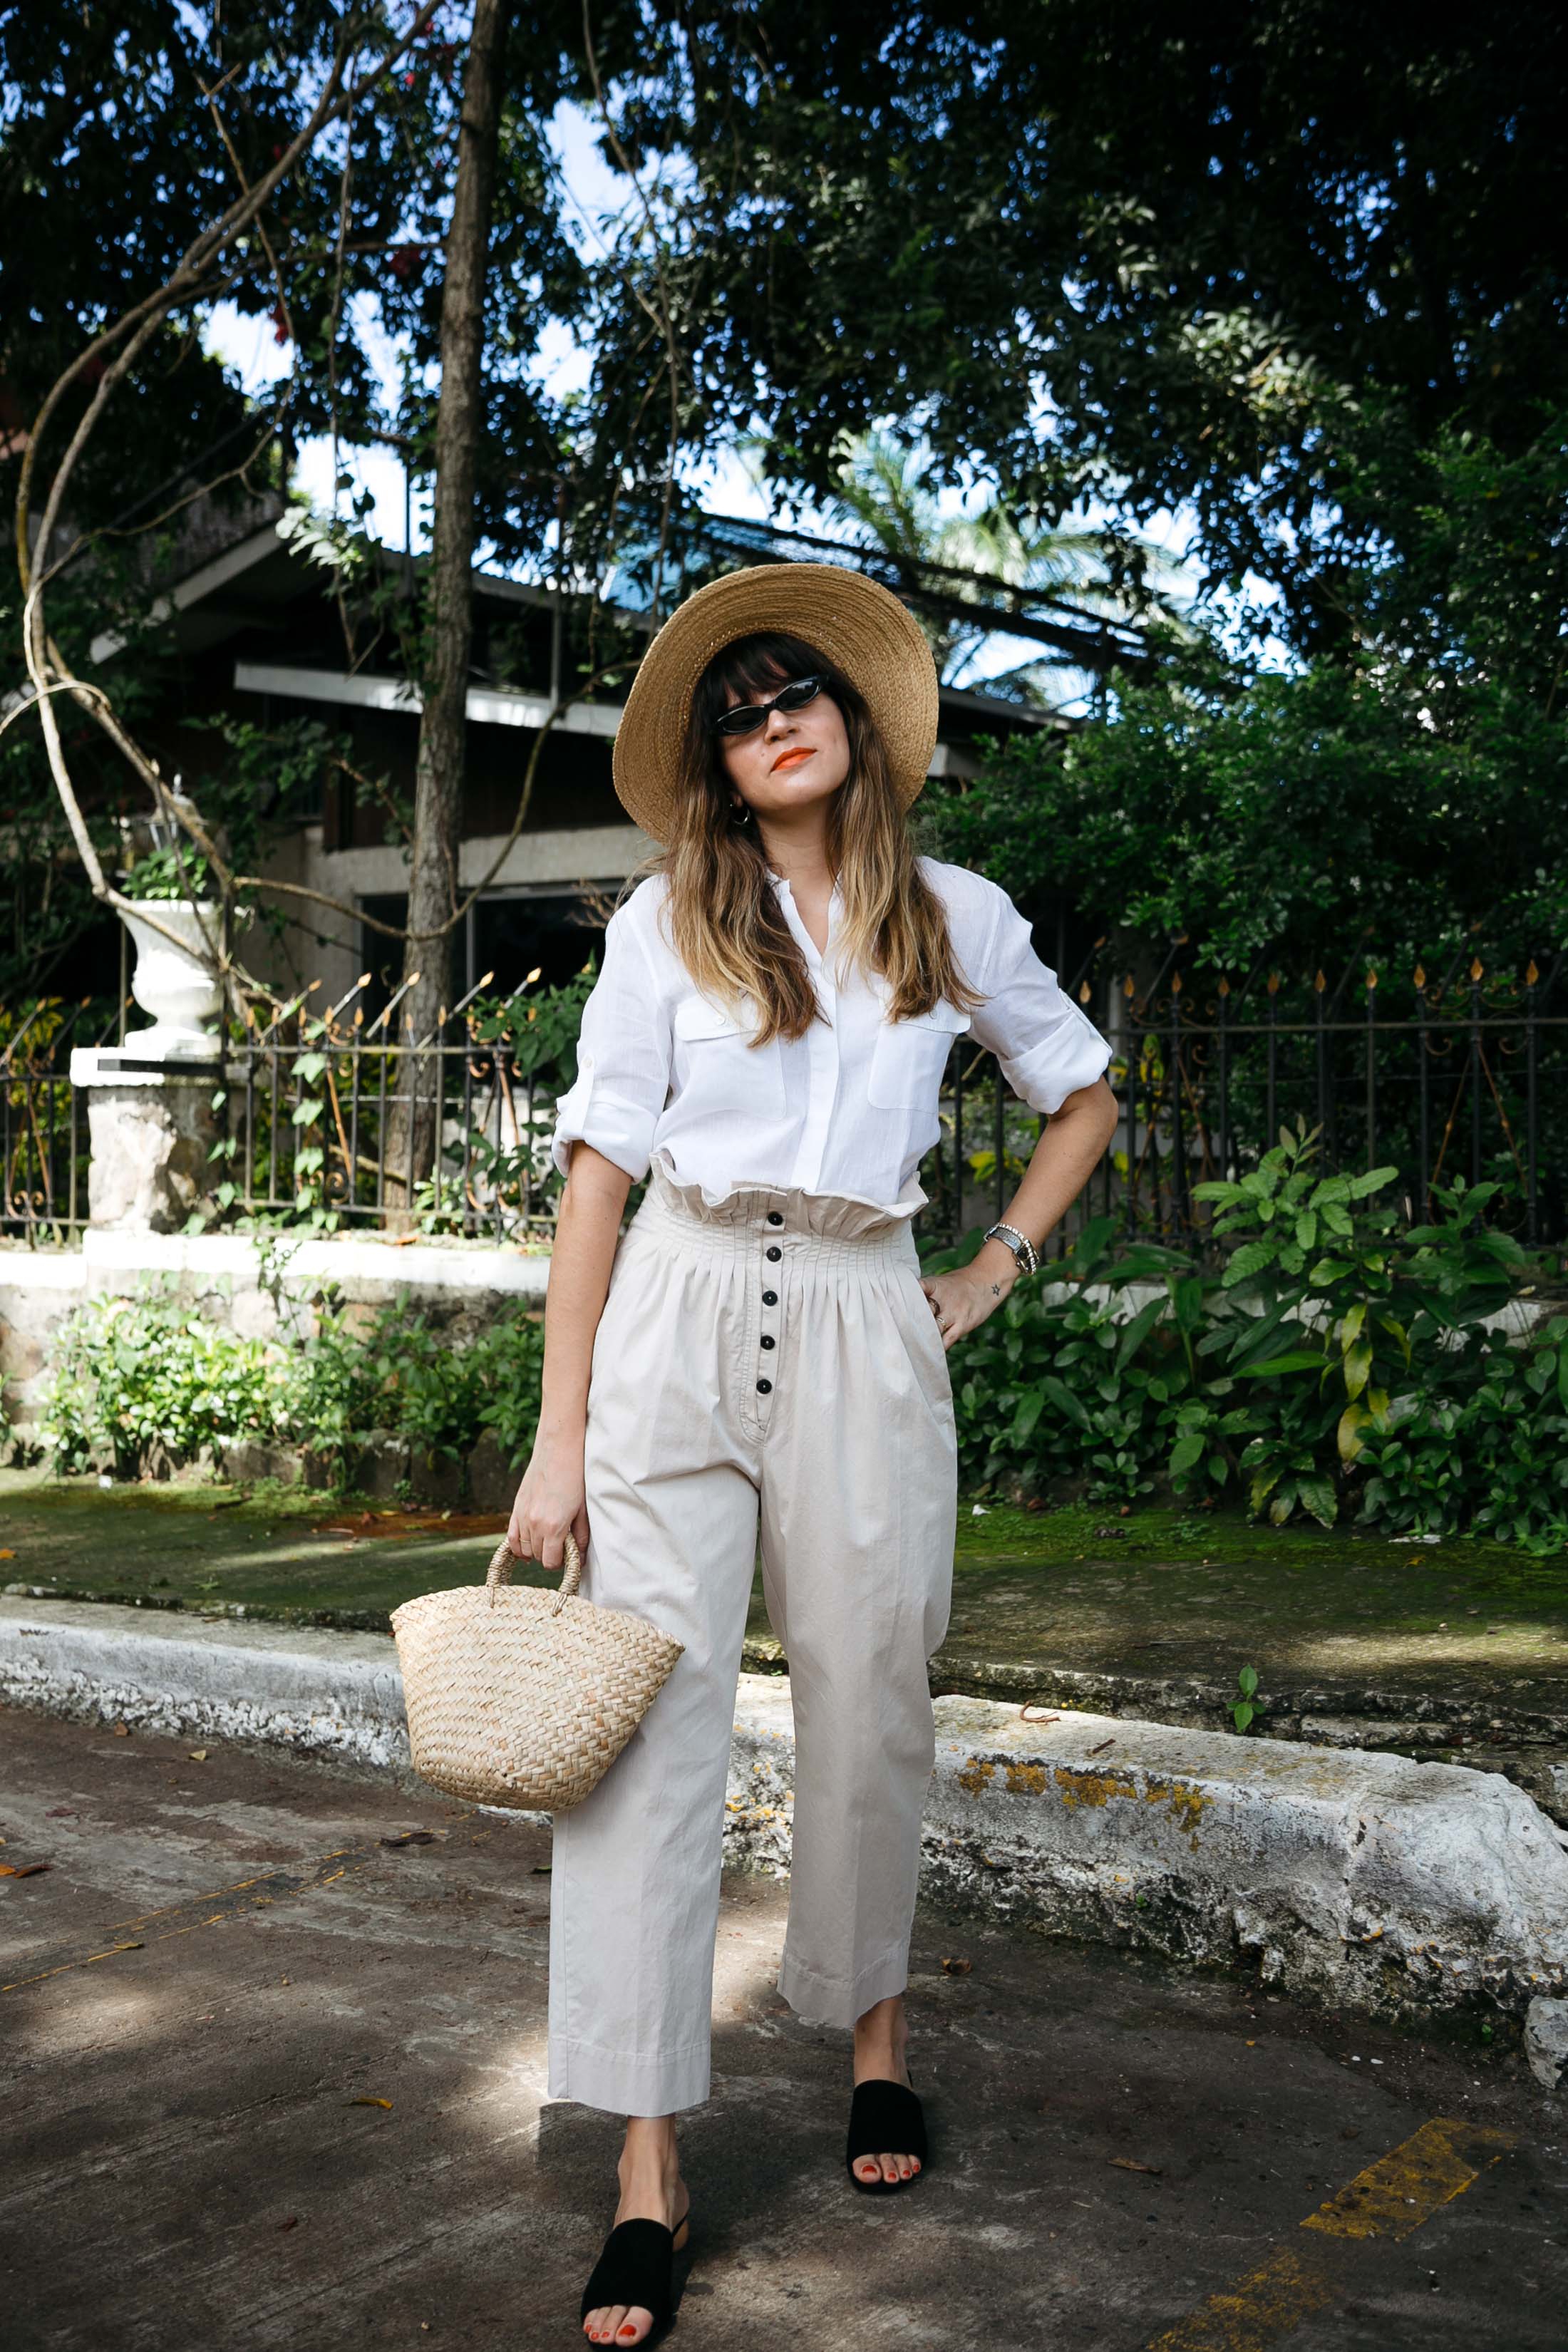 Maristella's Provence inspired summer outfit